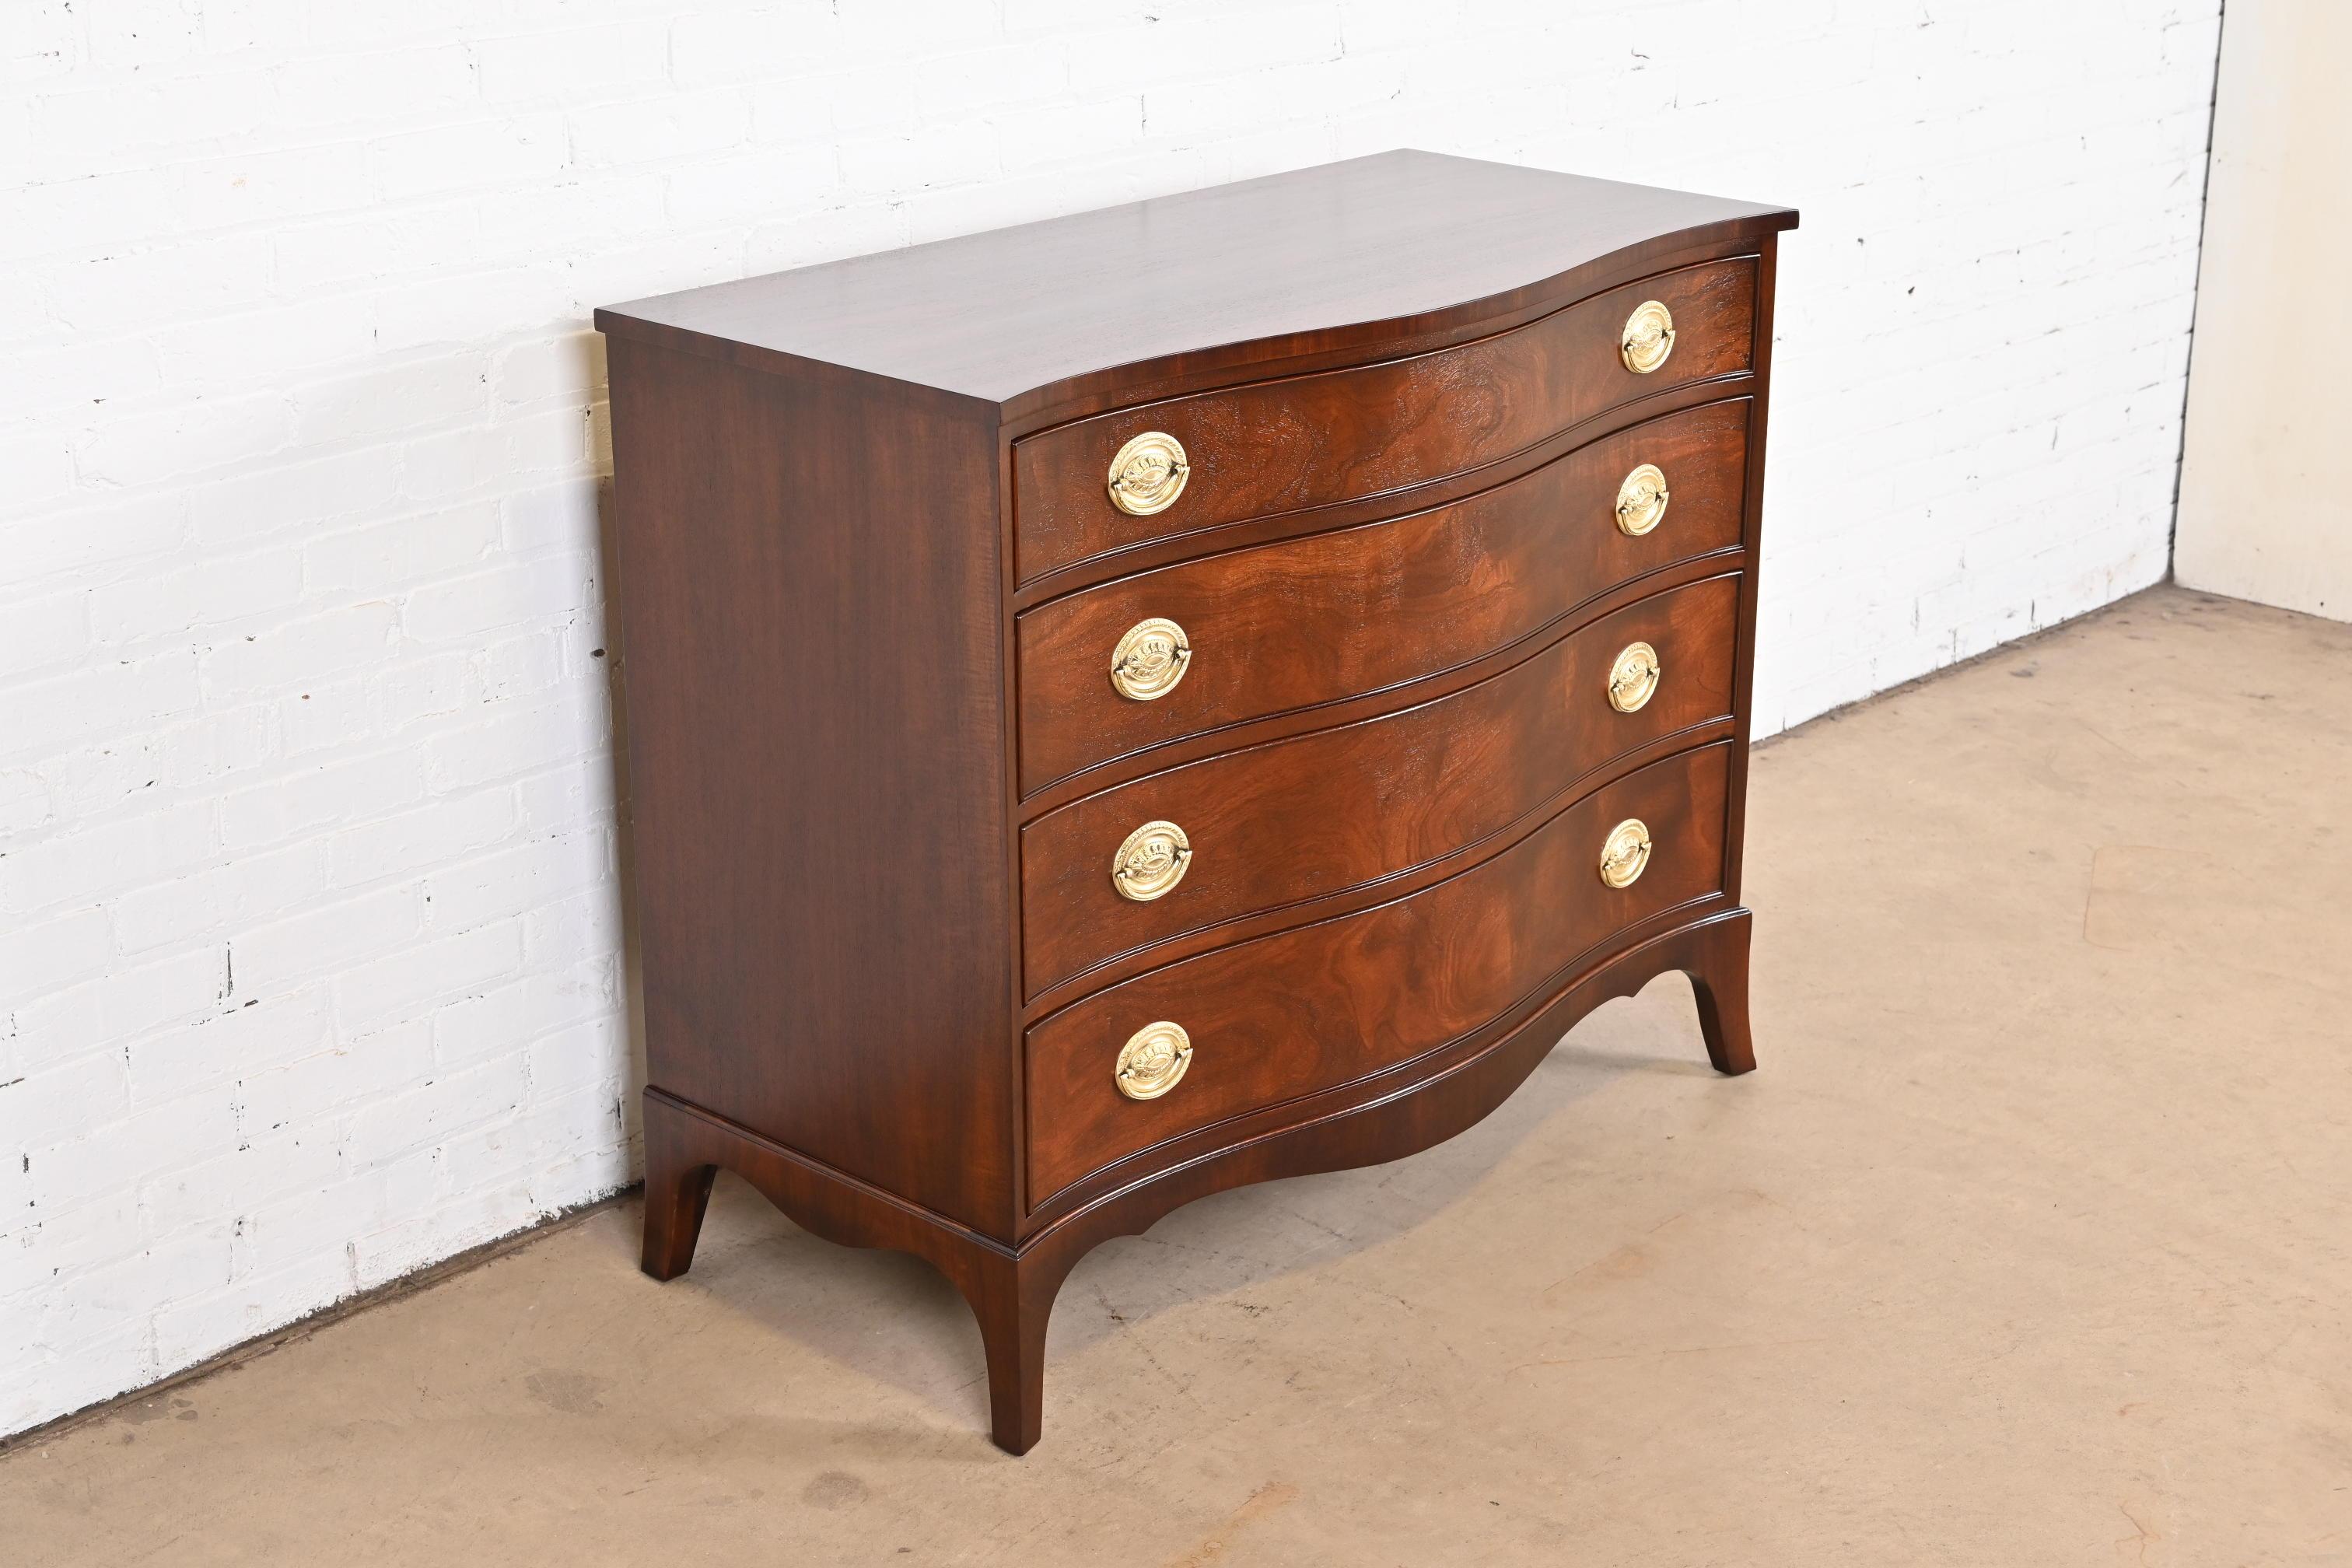 Kindel Furniture Georgian Mahogany Serpentine Front Chest of Drawers, Refinished 1